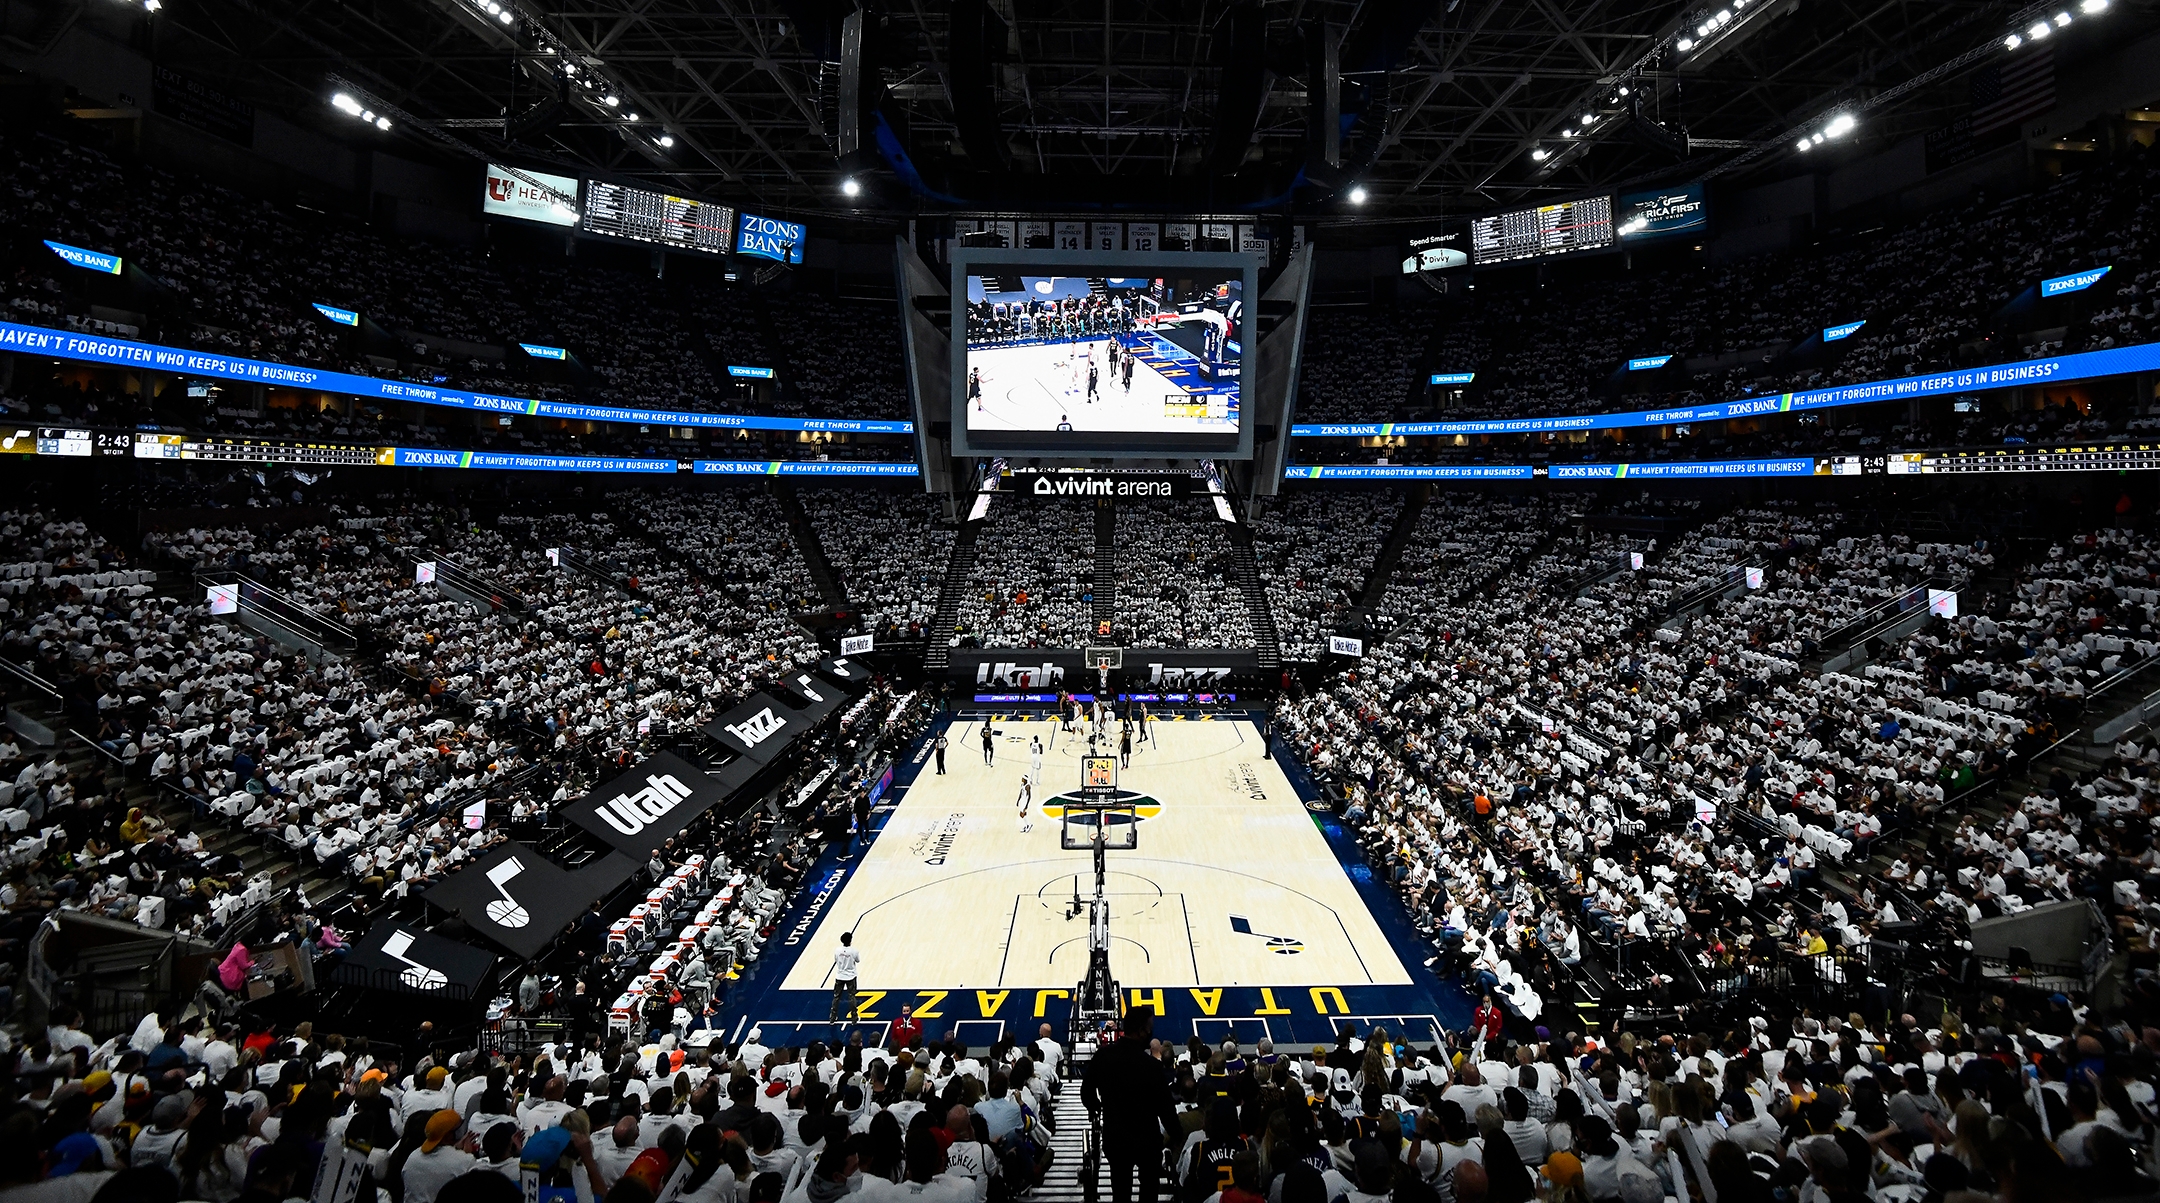 Fans watch the Utah Jazz play the Memphis Grizzlies in a 2021 playoff game at Vivint Smart Home Arena in Salt Lake City, May 23, 2021. (Alex Goodlett/Getty Images)